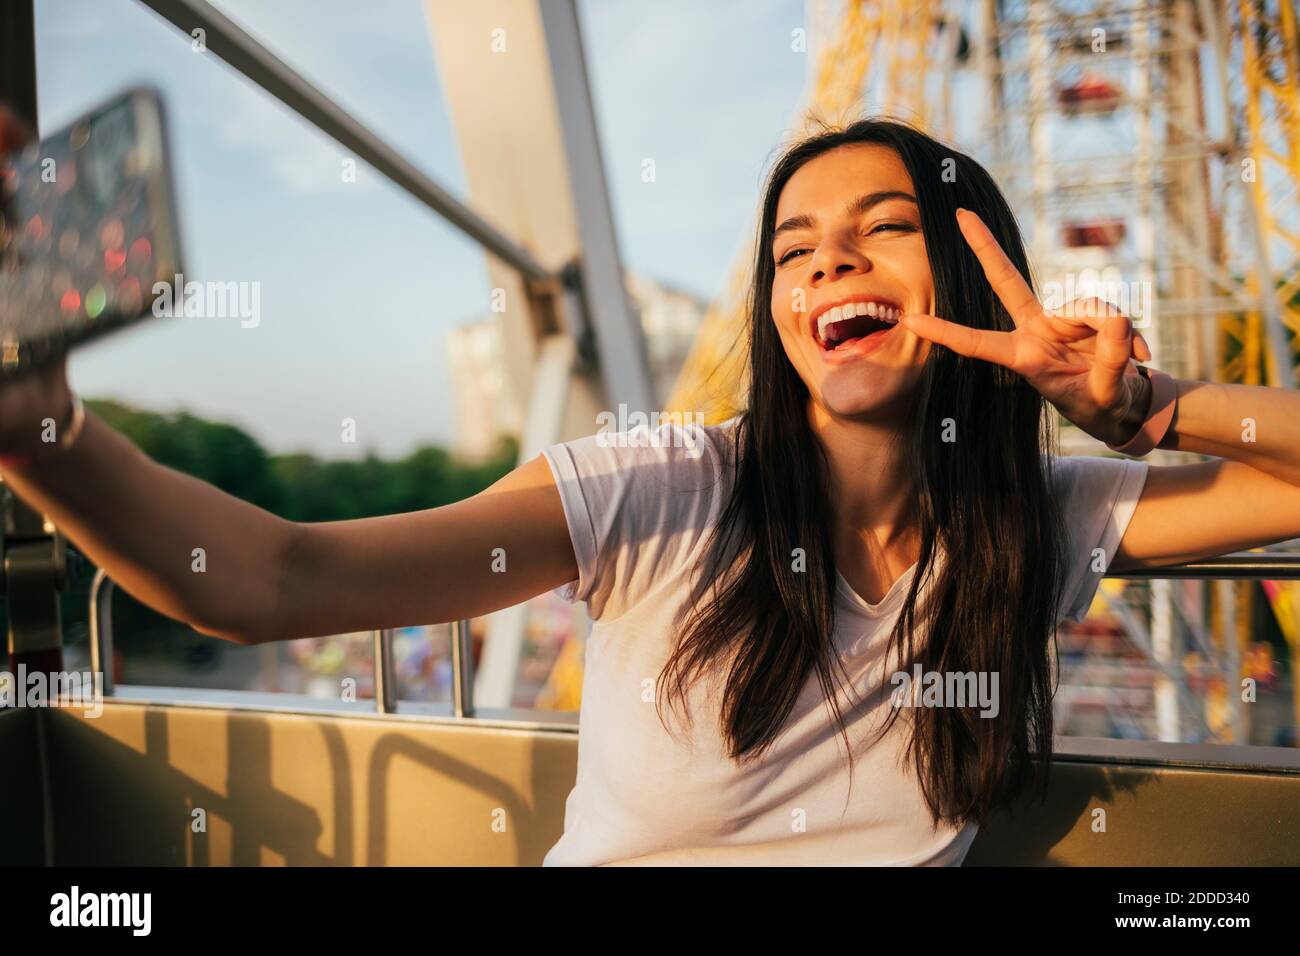 Cheerful woman on Ferris wheel using mobile phone while taking selfie at amusement park Stock Photo